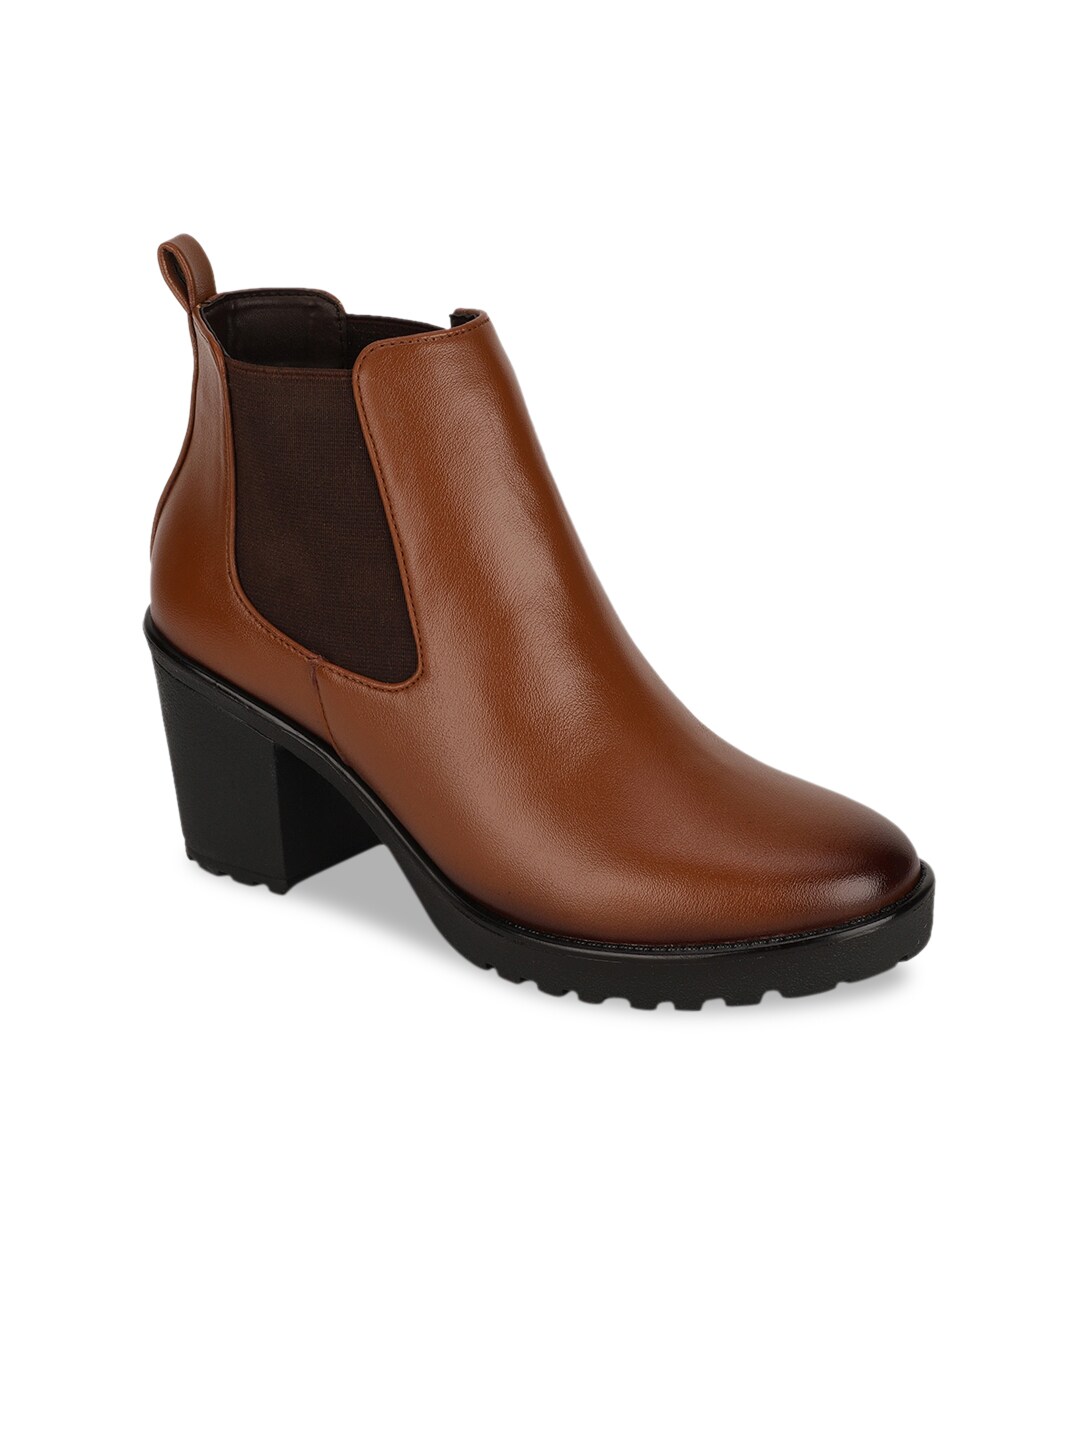 Bruno Manetti Tan Leather Block Heeled Boots Price in India